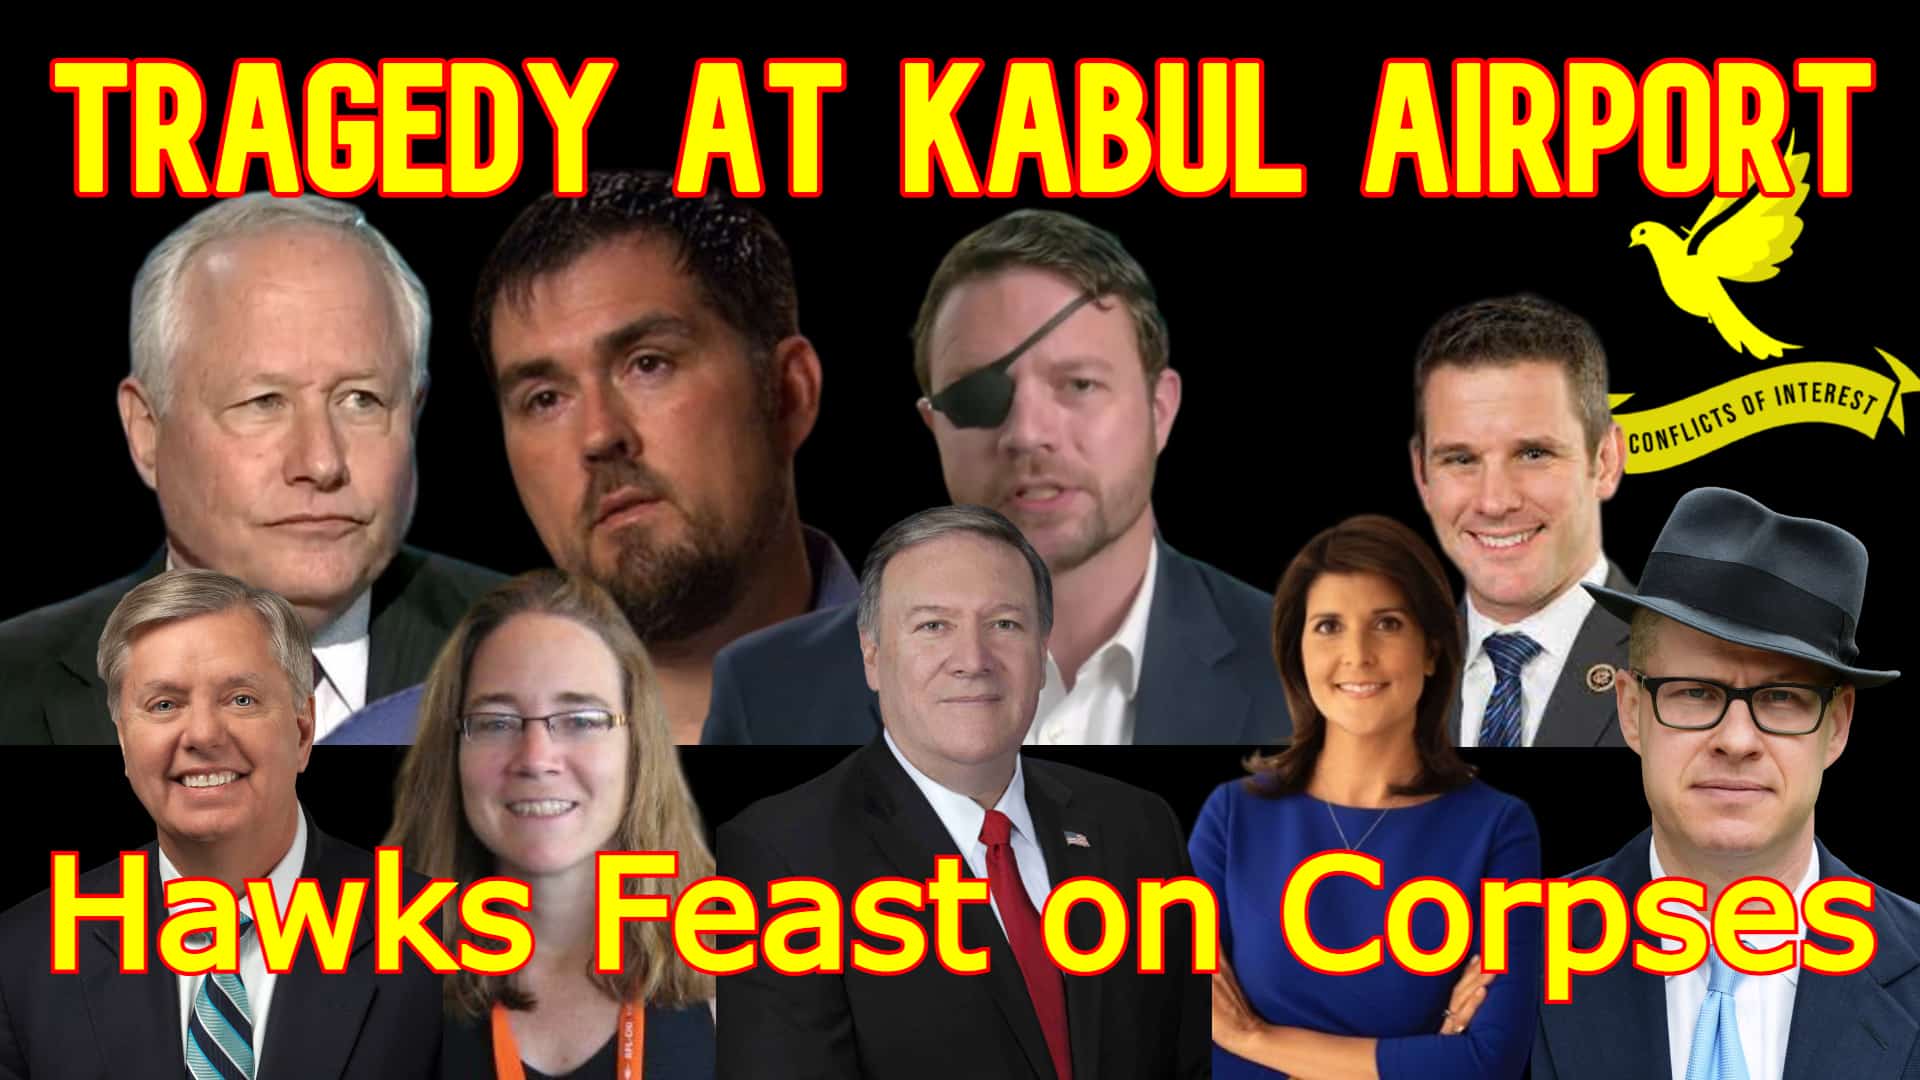 COI #154: The War State Spins Lies to Exploit Tragedy at Kabul Airport